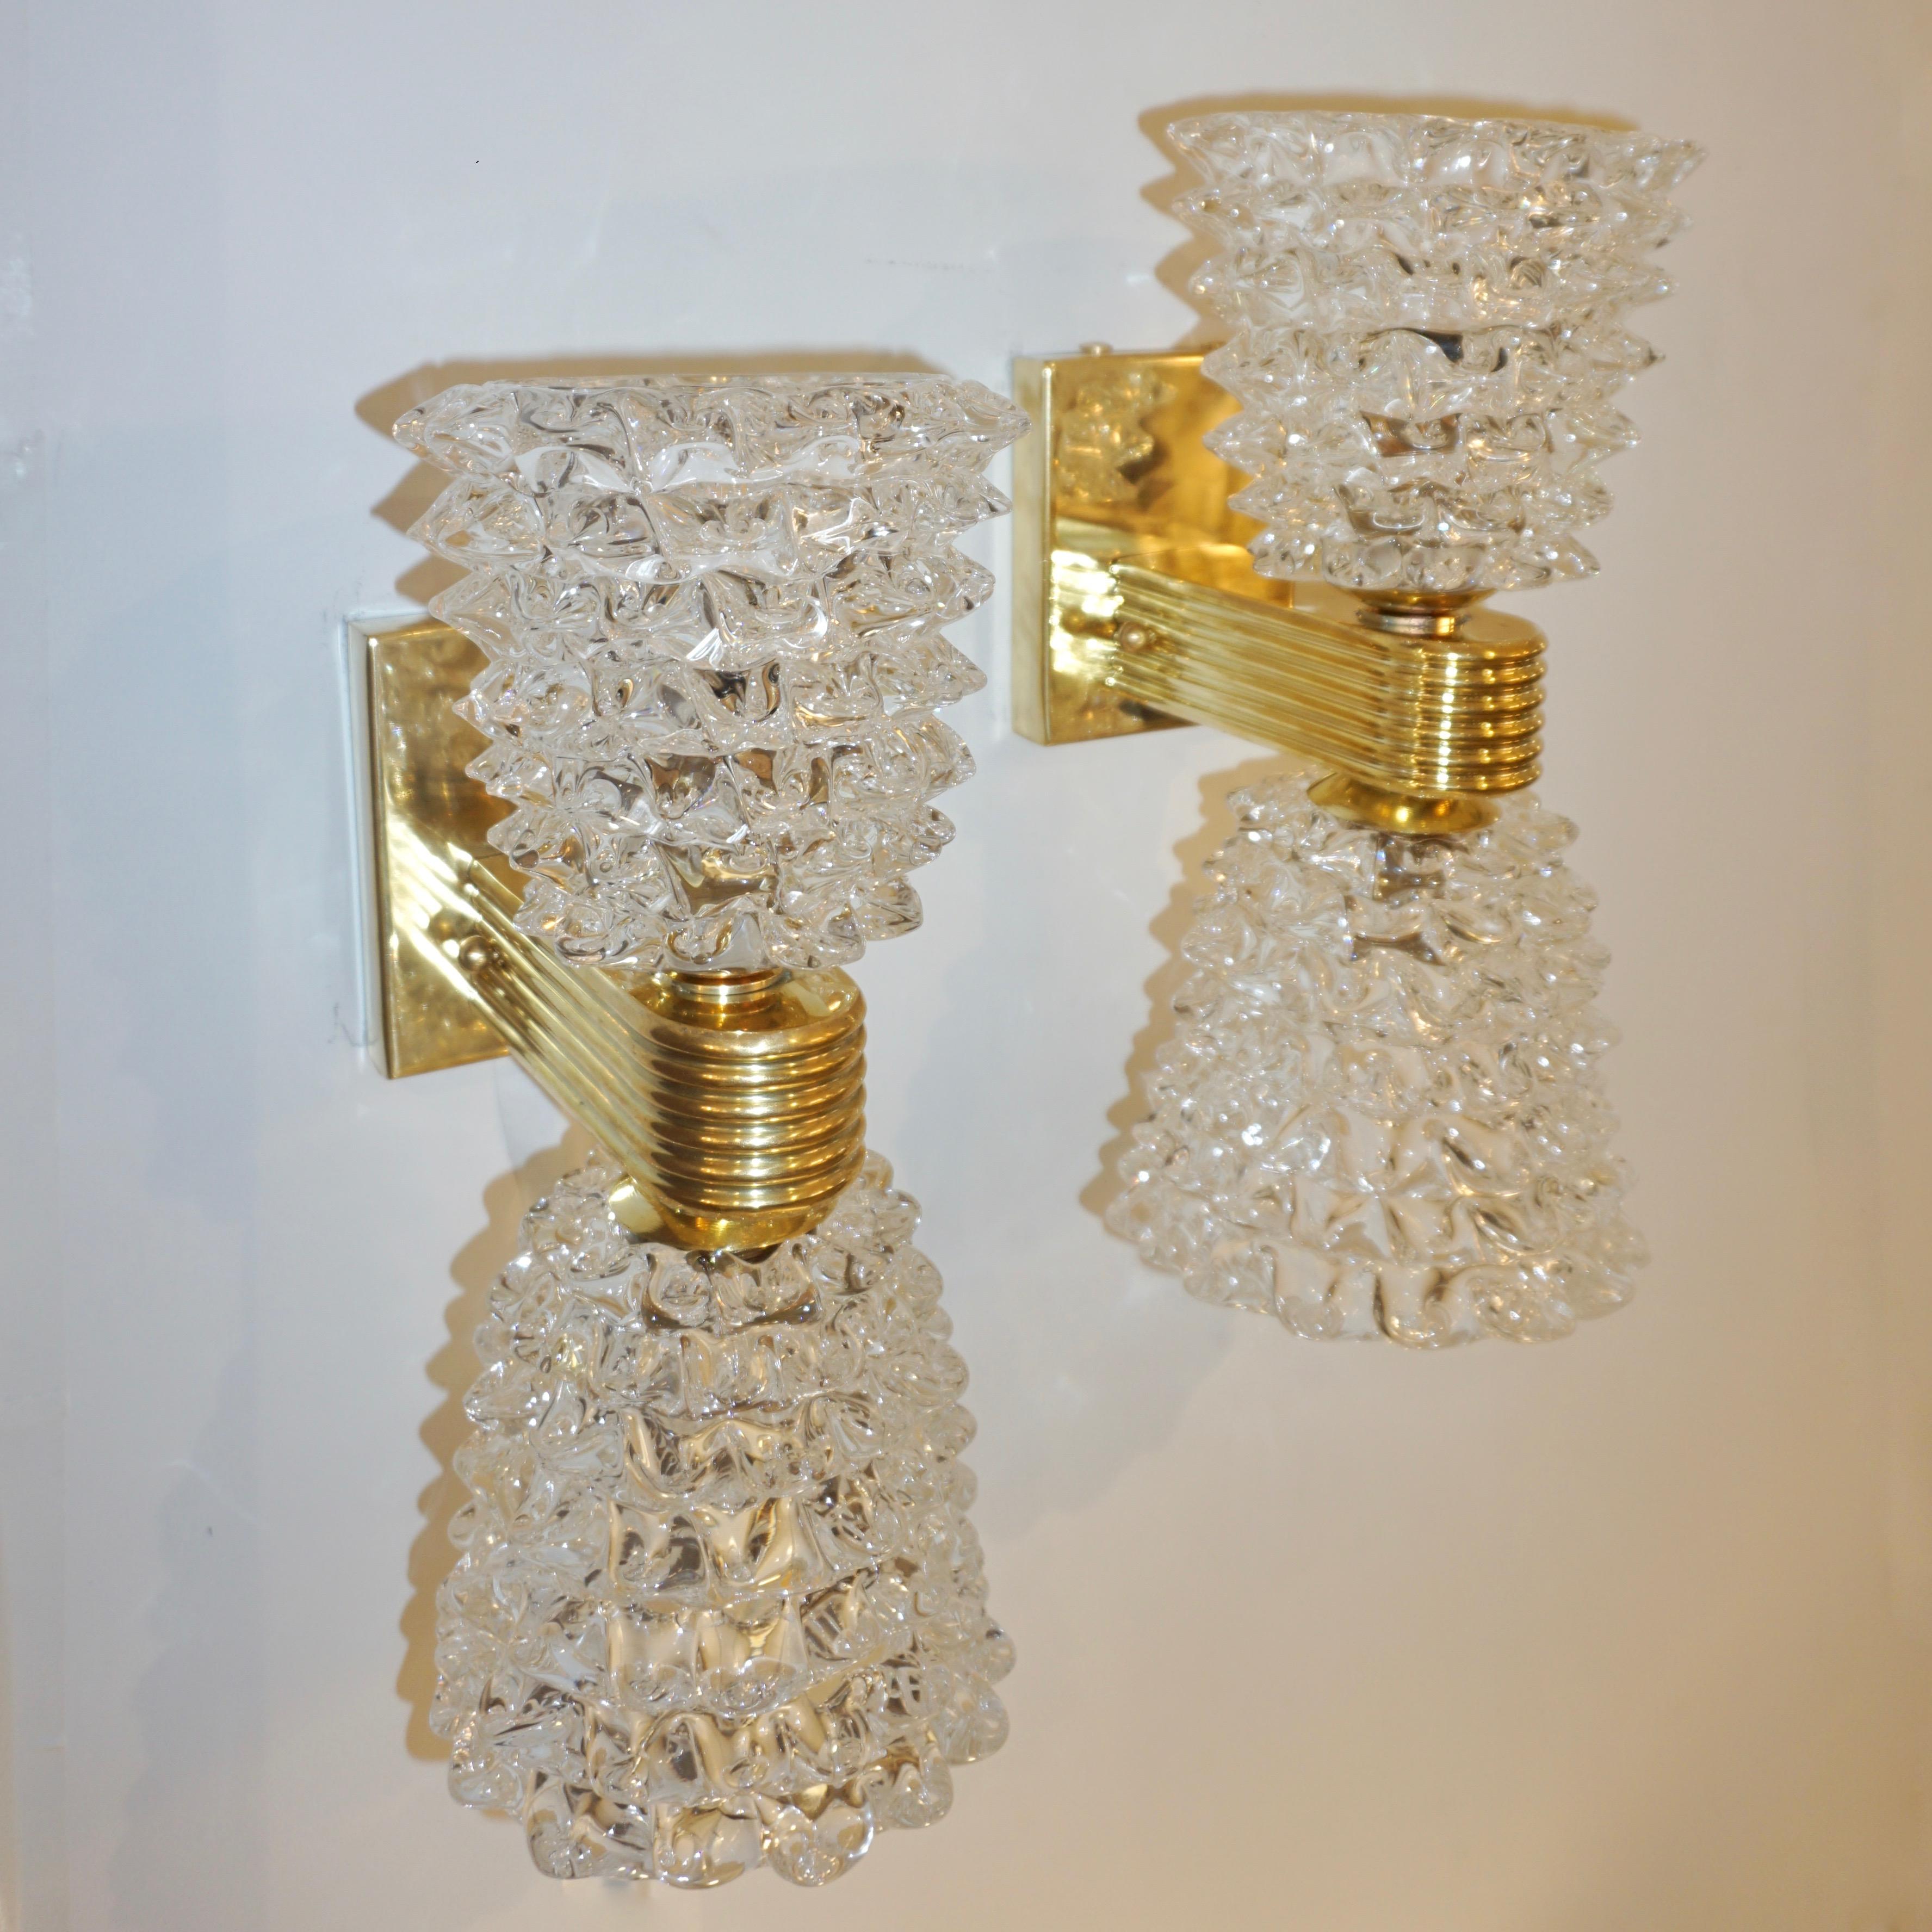 Contemporary Italian Rostrato Crystal Murano Glass & Brass Double-Lit Sconces For Sale 7